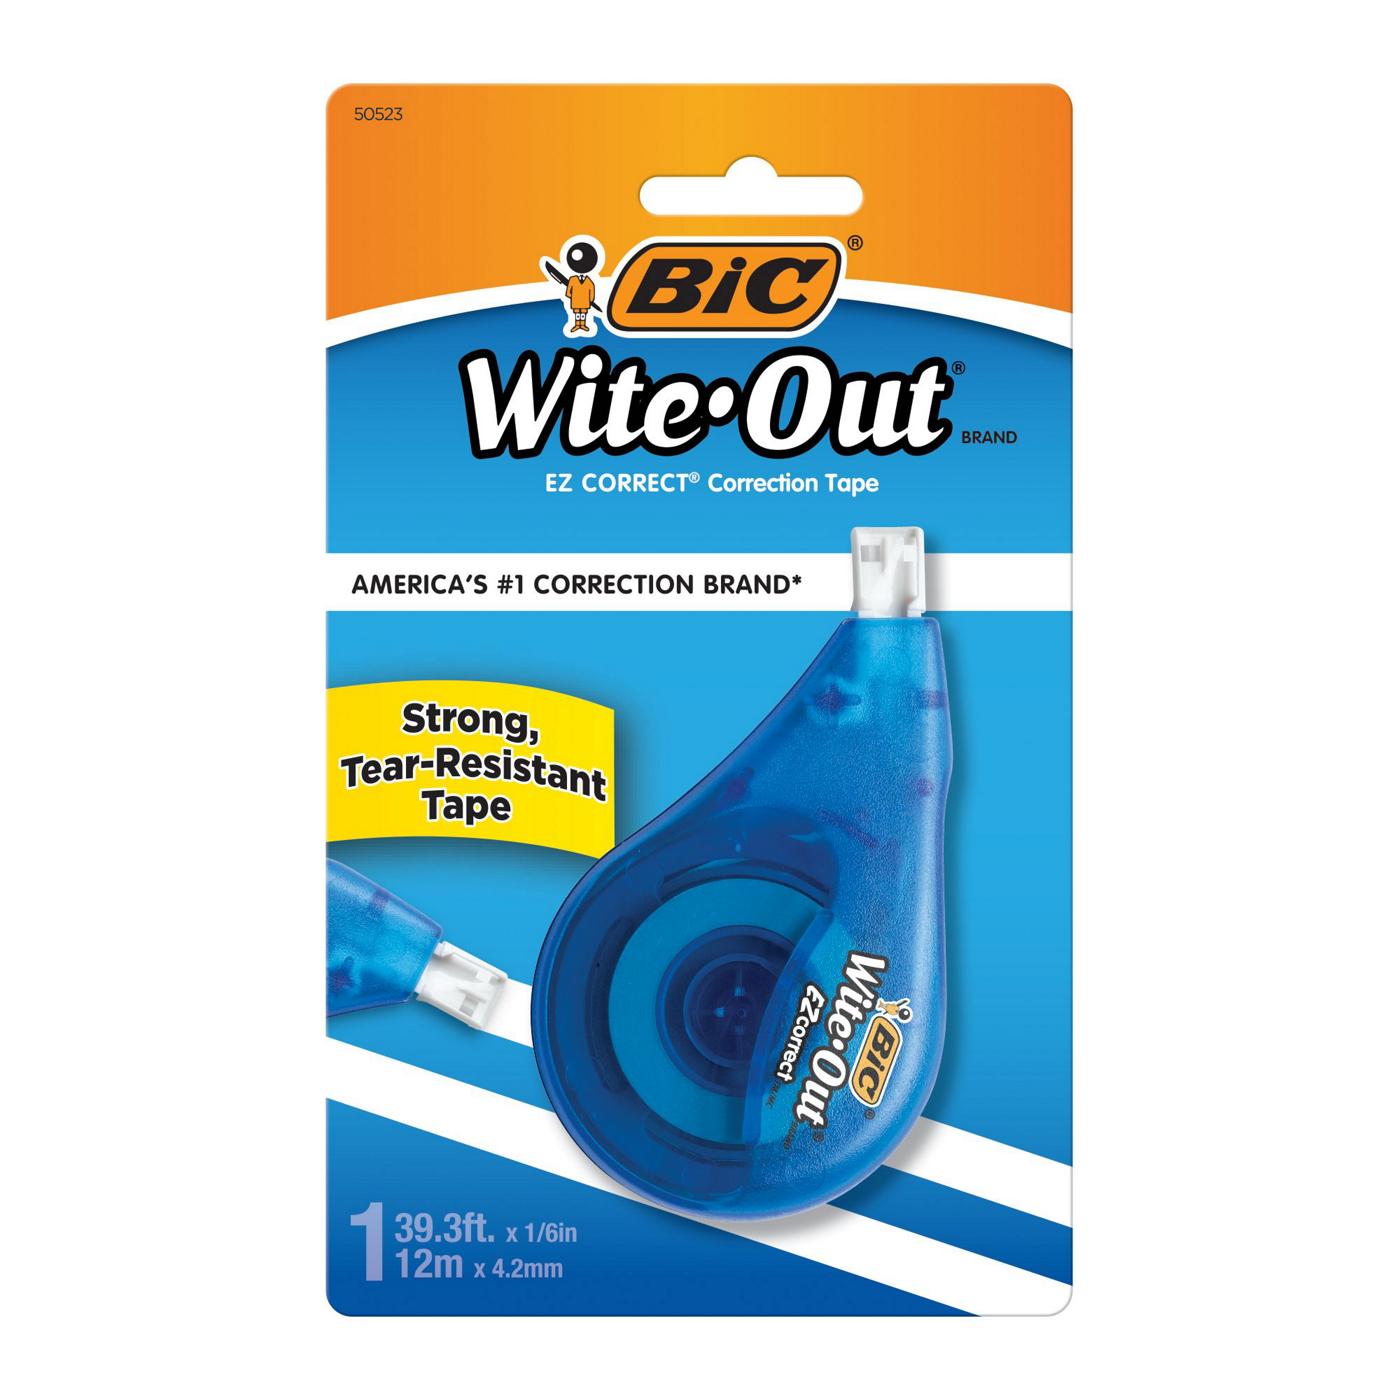 BIC Wite-Out EZ Correct Correction Tape; image 1 of 2